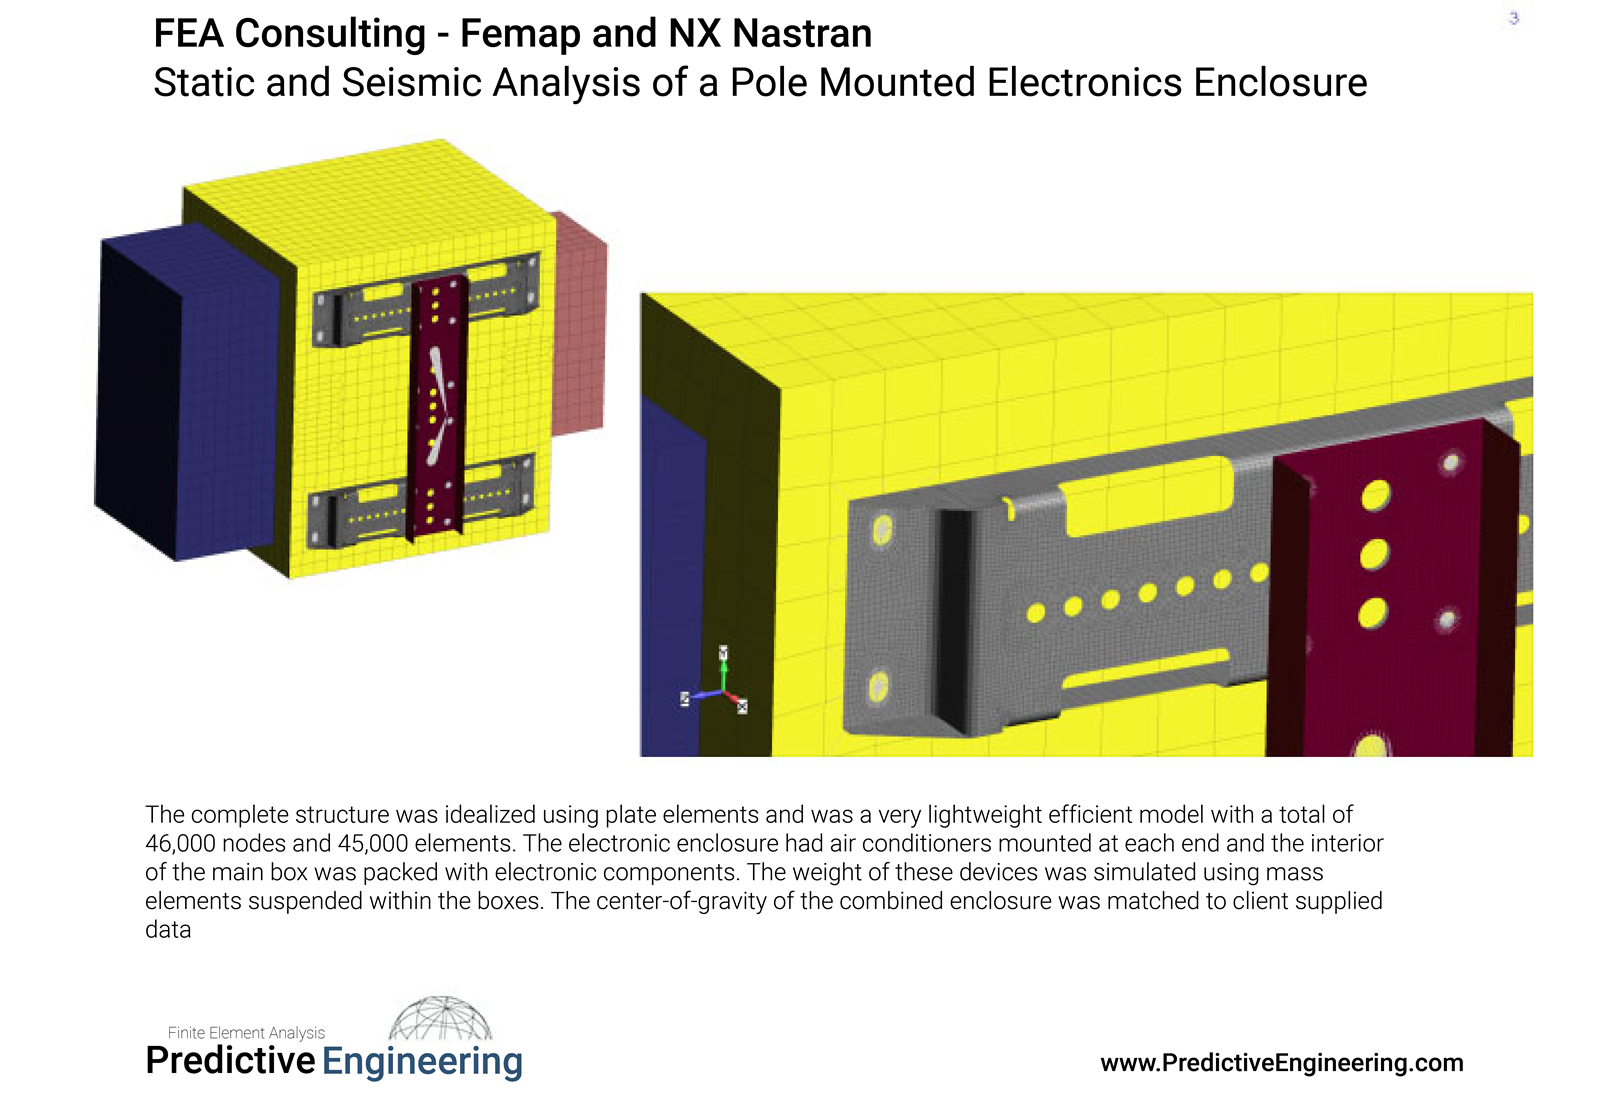 Figure 2: FEA model of pole mounted antenna enclosure used for the response spectrum simulation per GR-63-Core